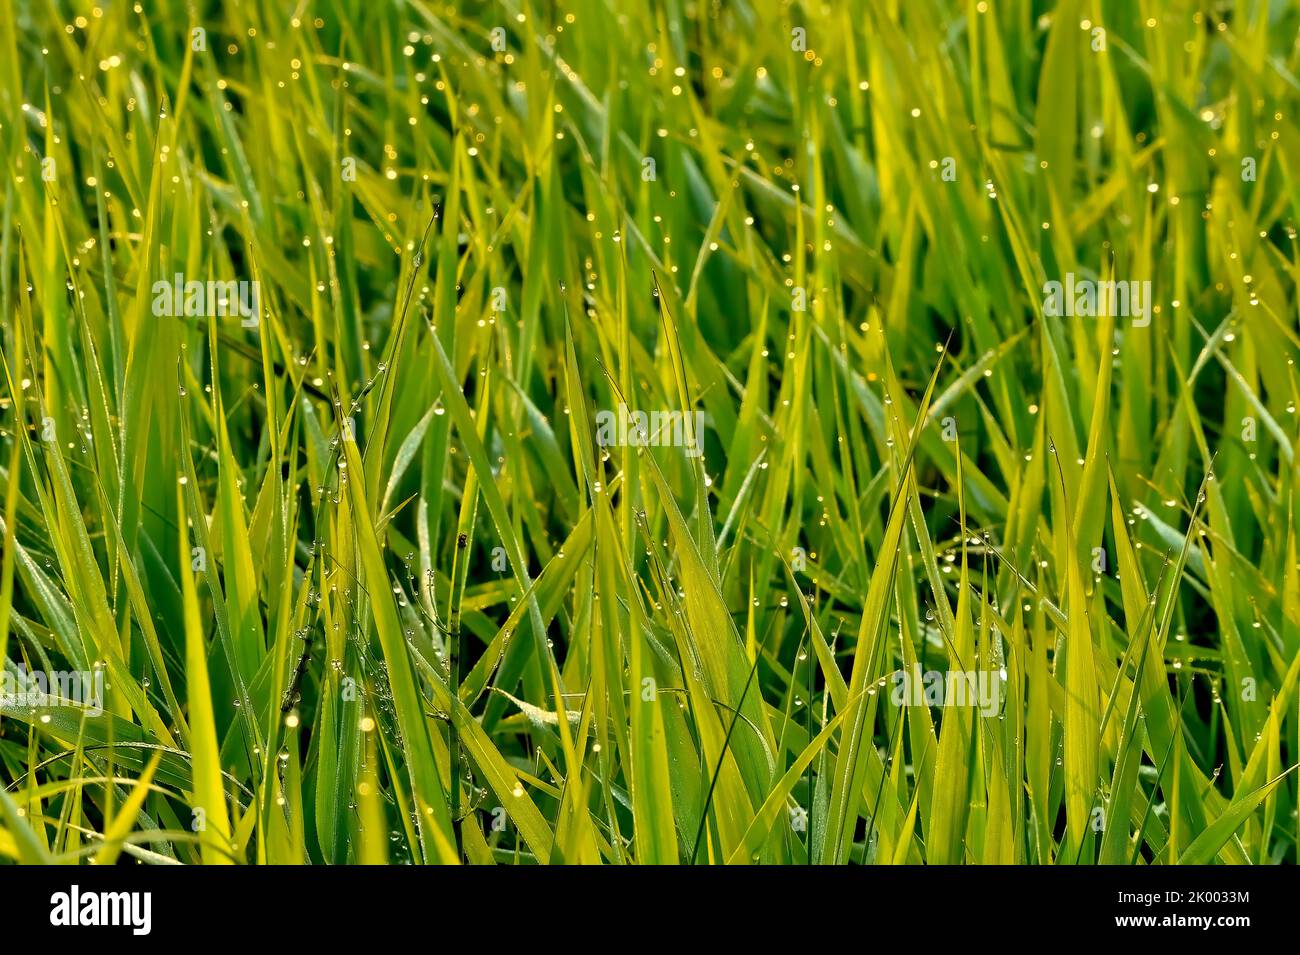 Marsh grass kissed with an early morning dew in rural Alberta Canada. Stock Photo